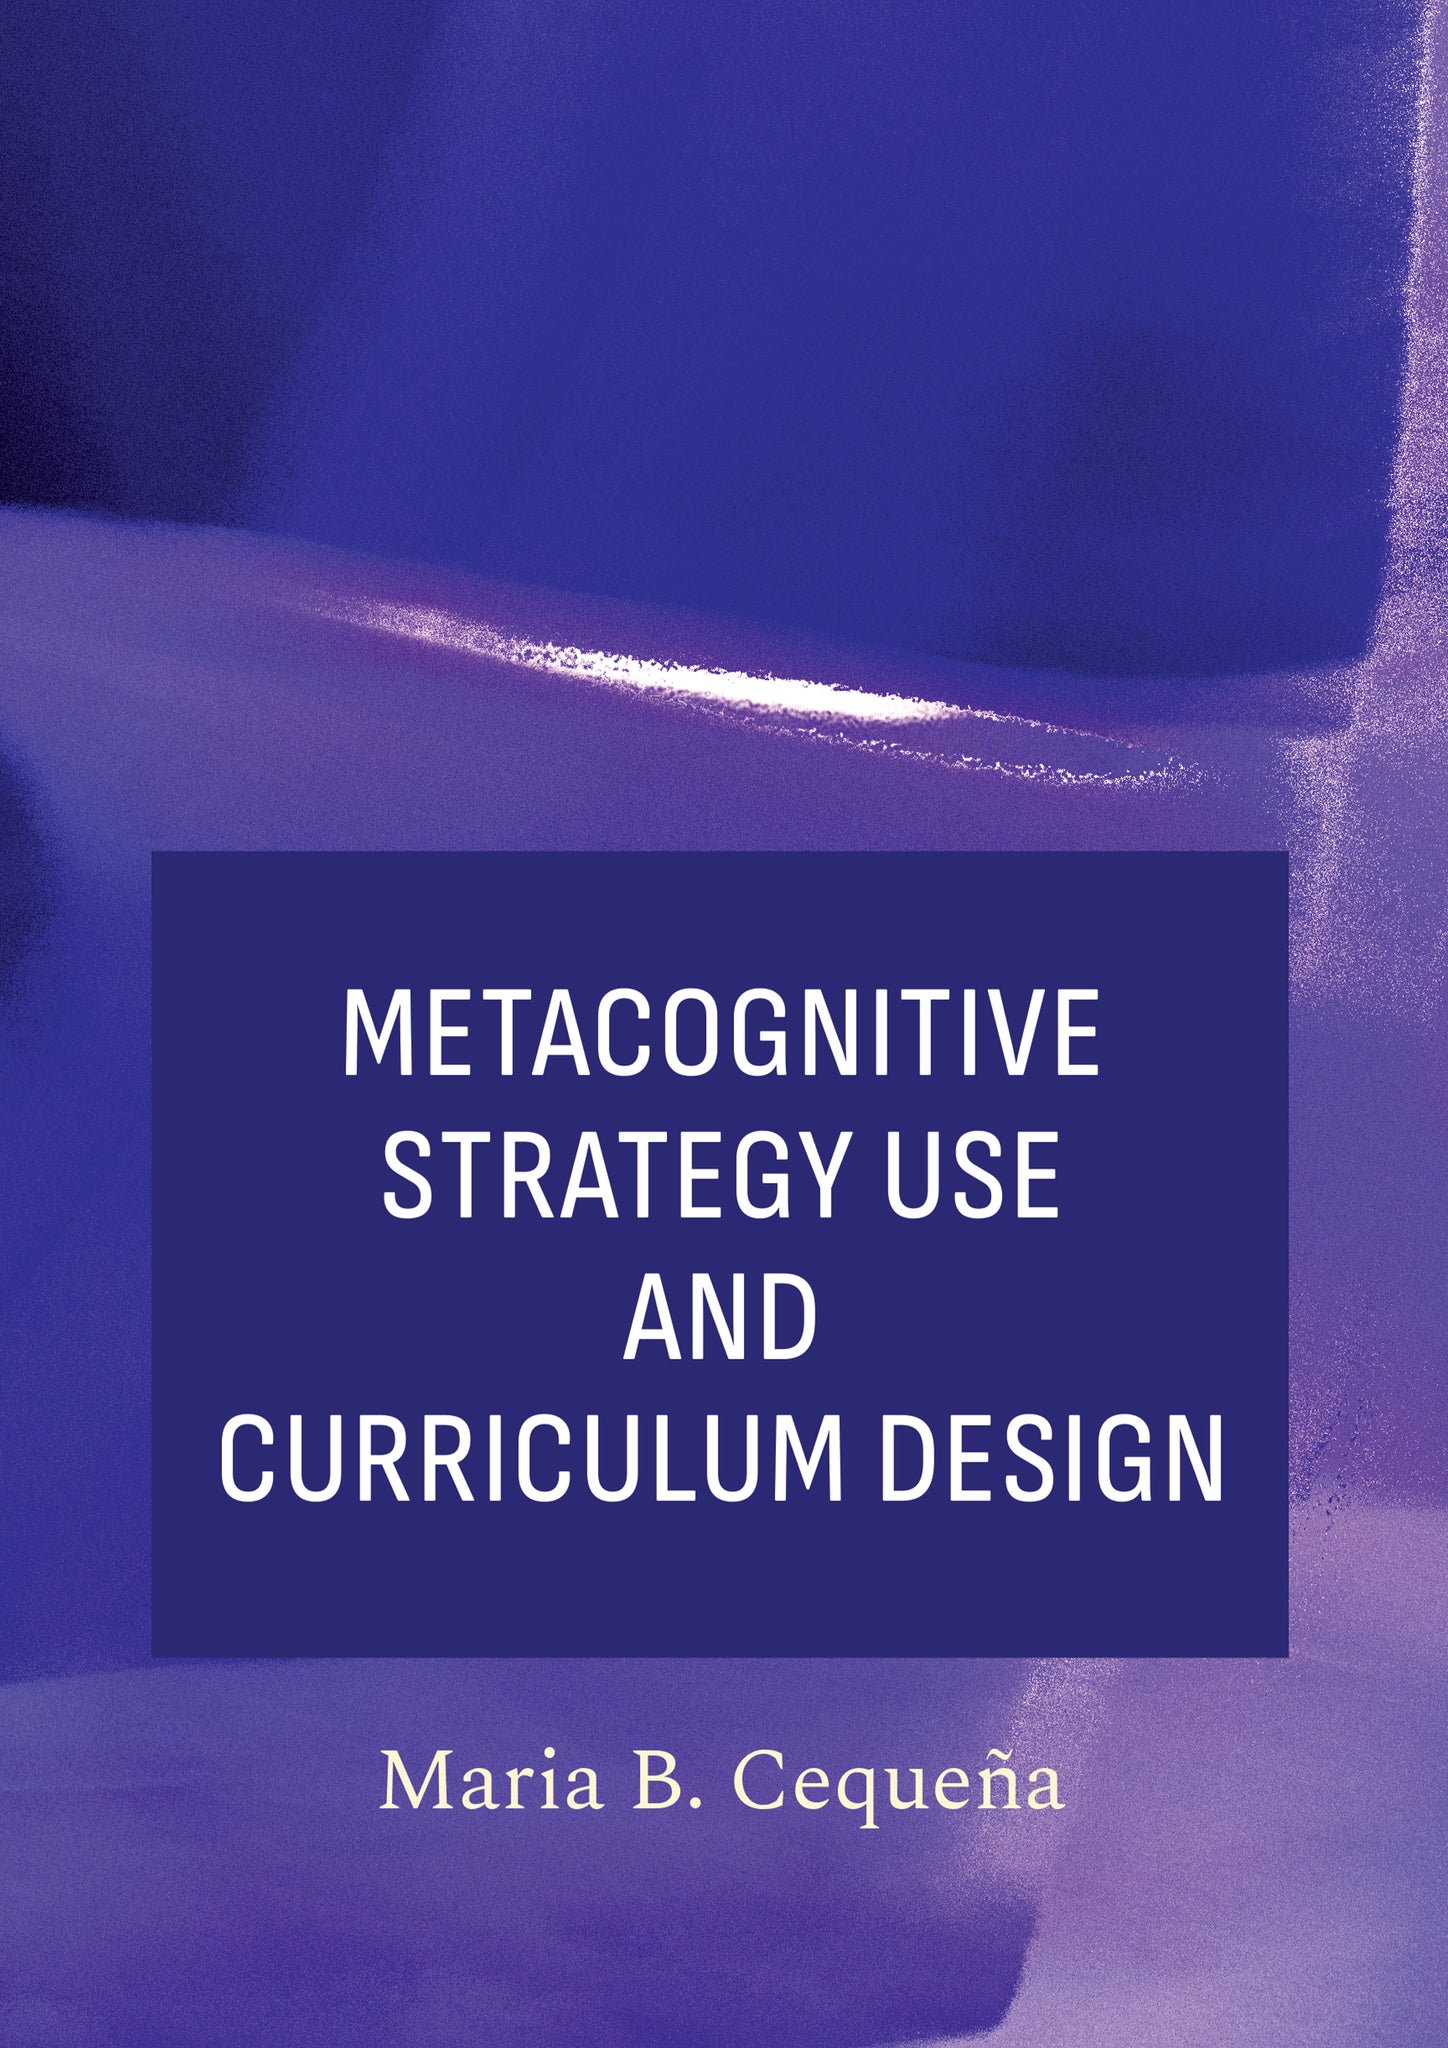 Metacognitive Strategy Use and Curriculum Design